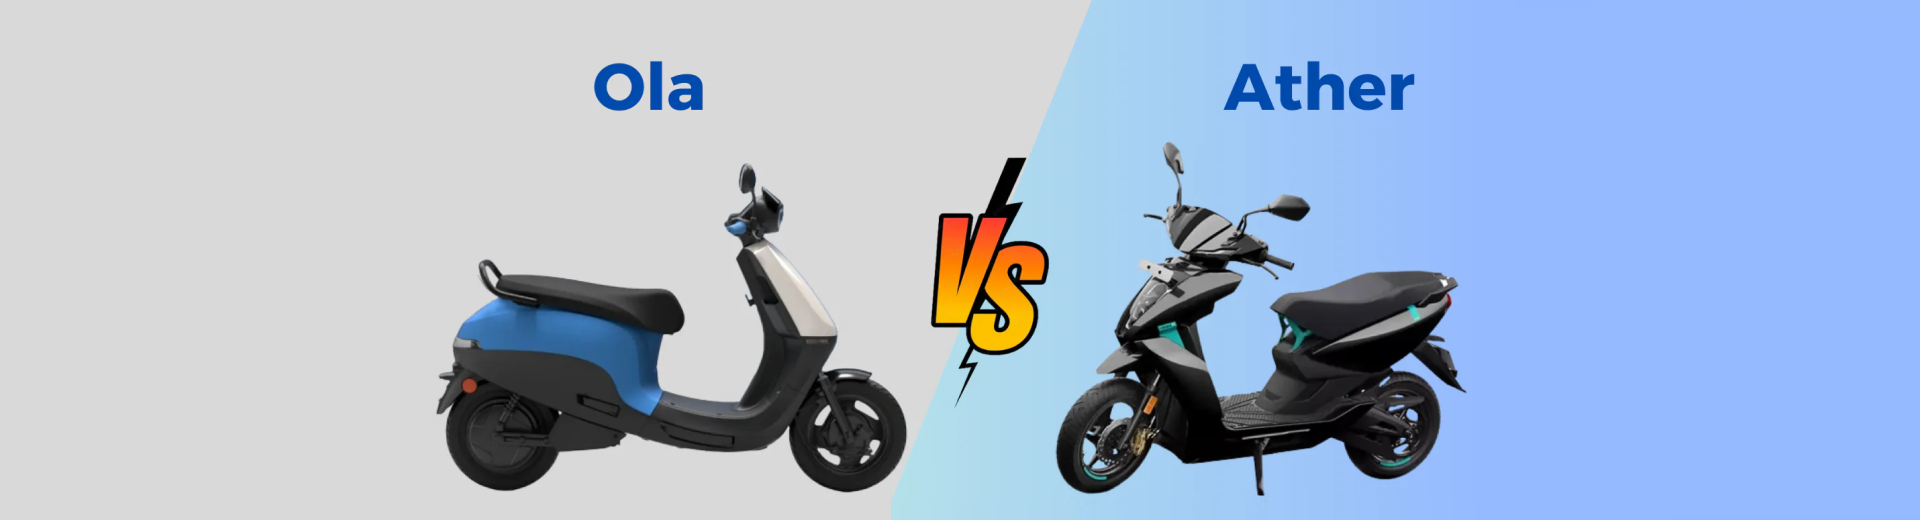 Ola Vs. Ather: Which Electric Scooter to Buy